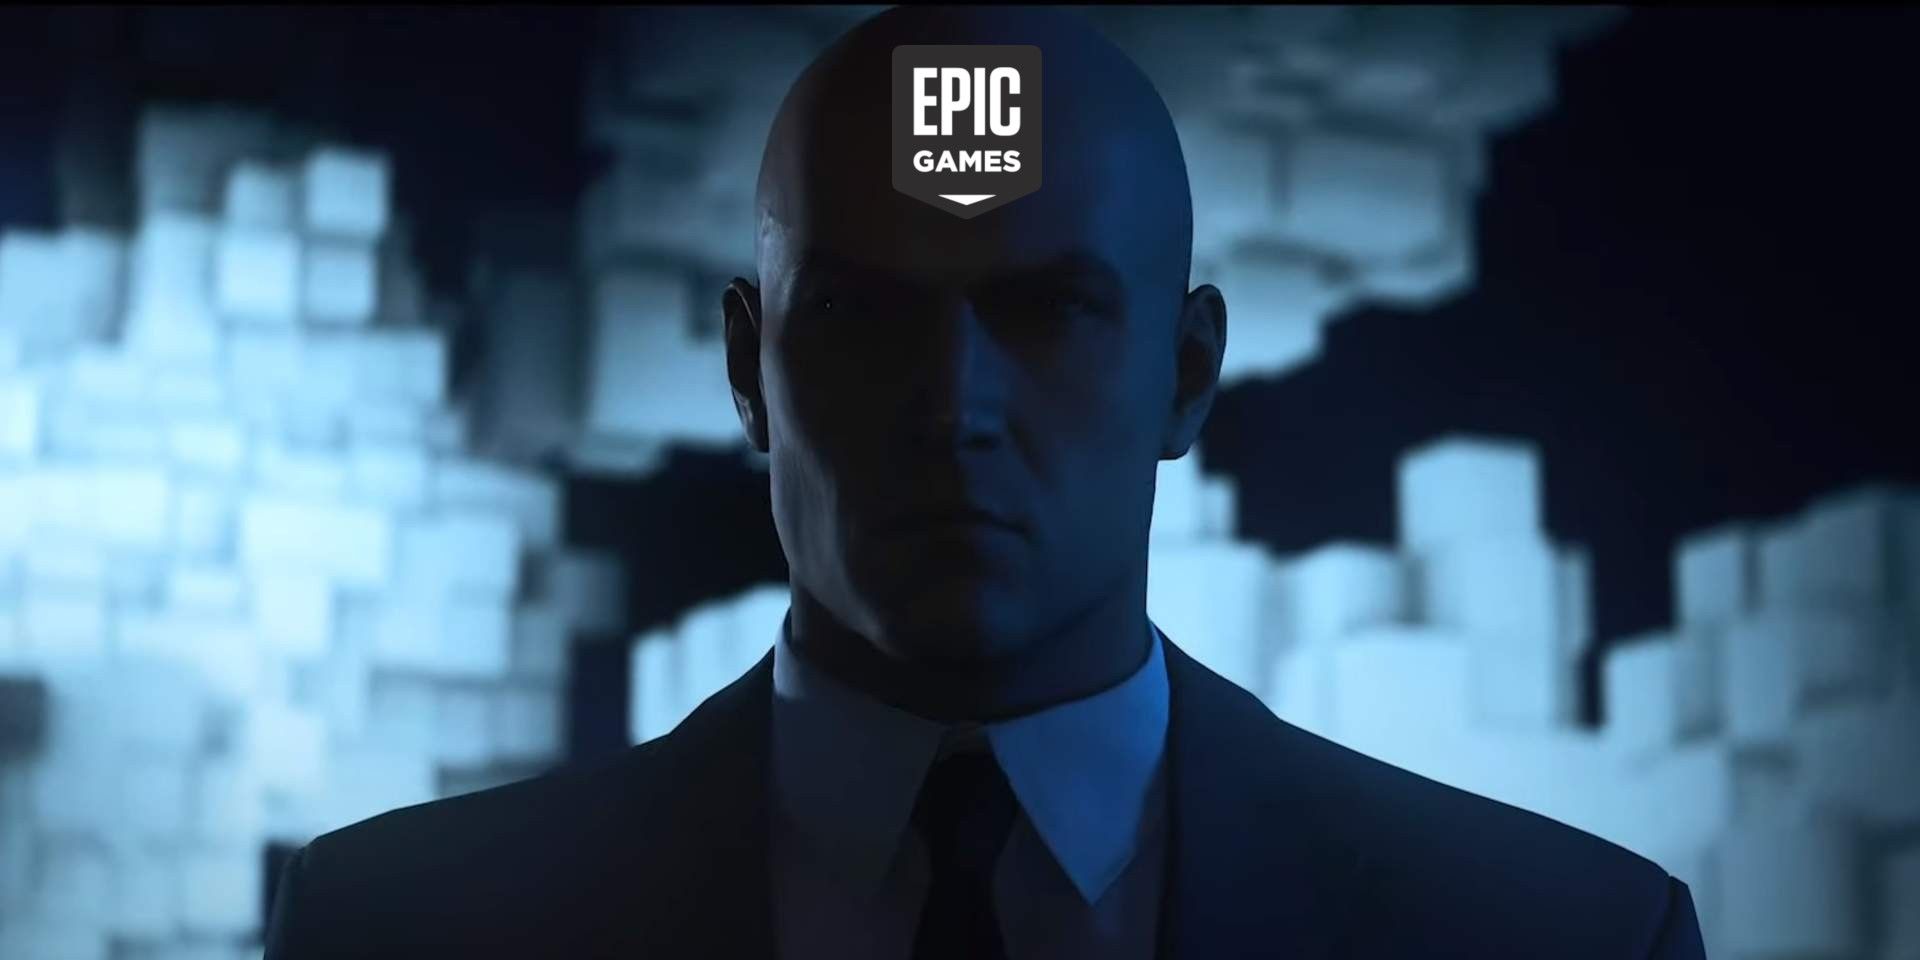 HITMAN 3 - Deluxe Pack - Epic Games Store